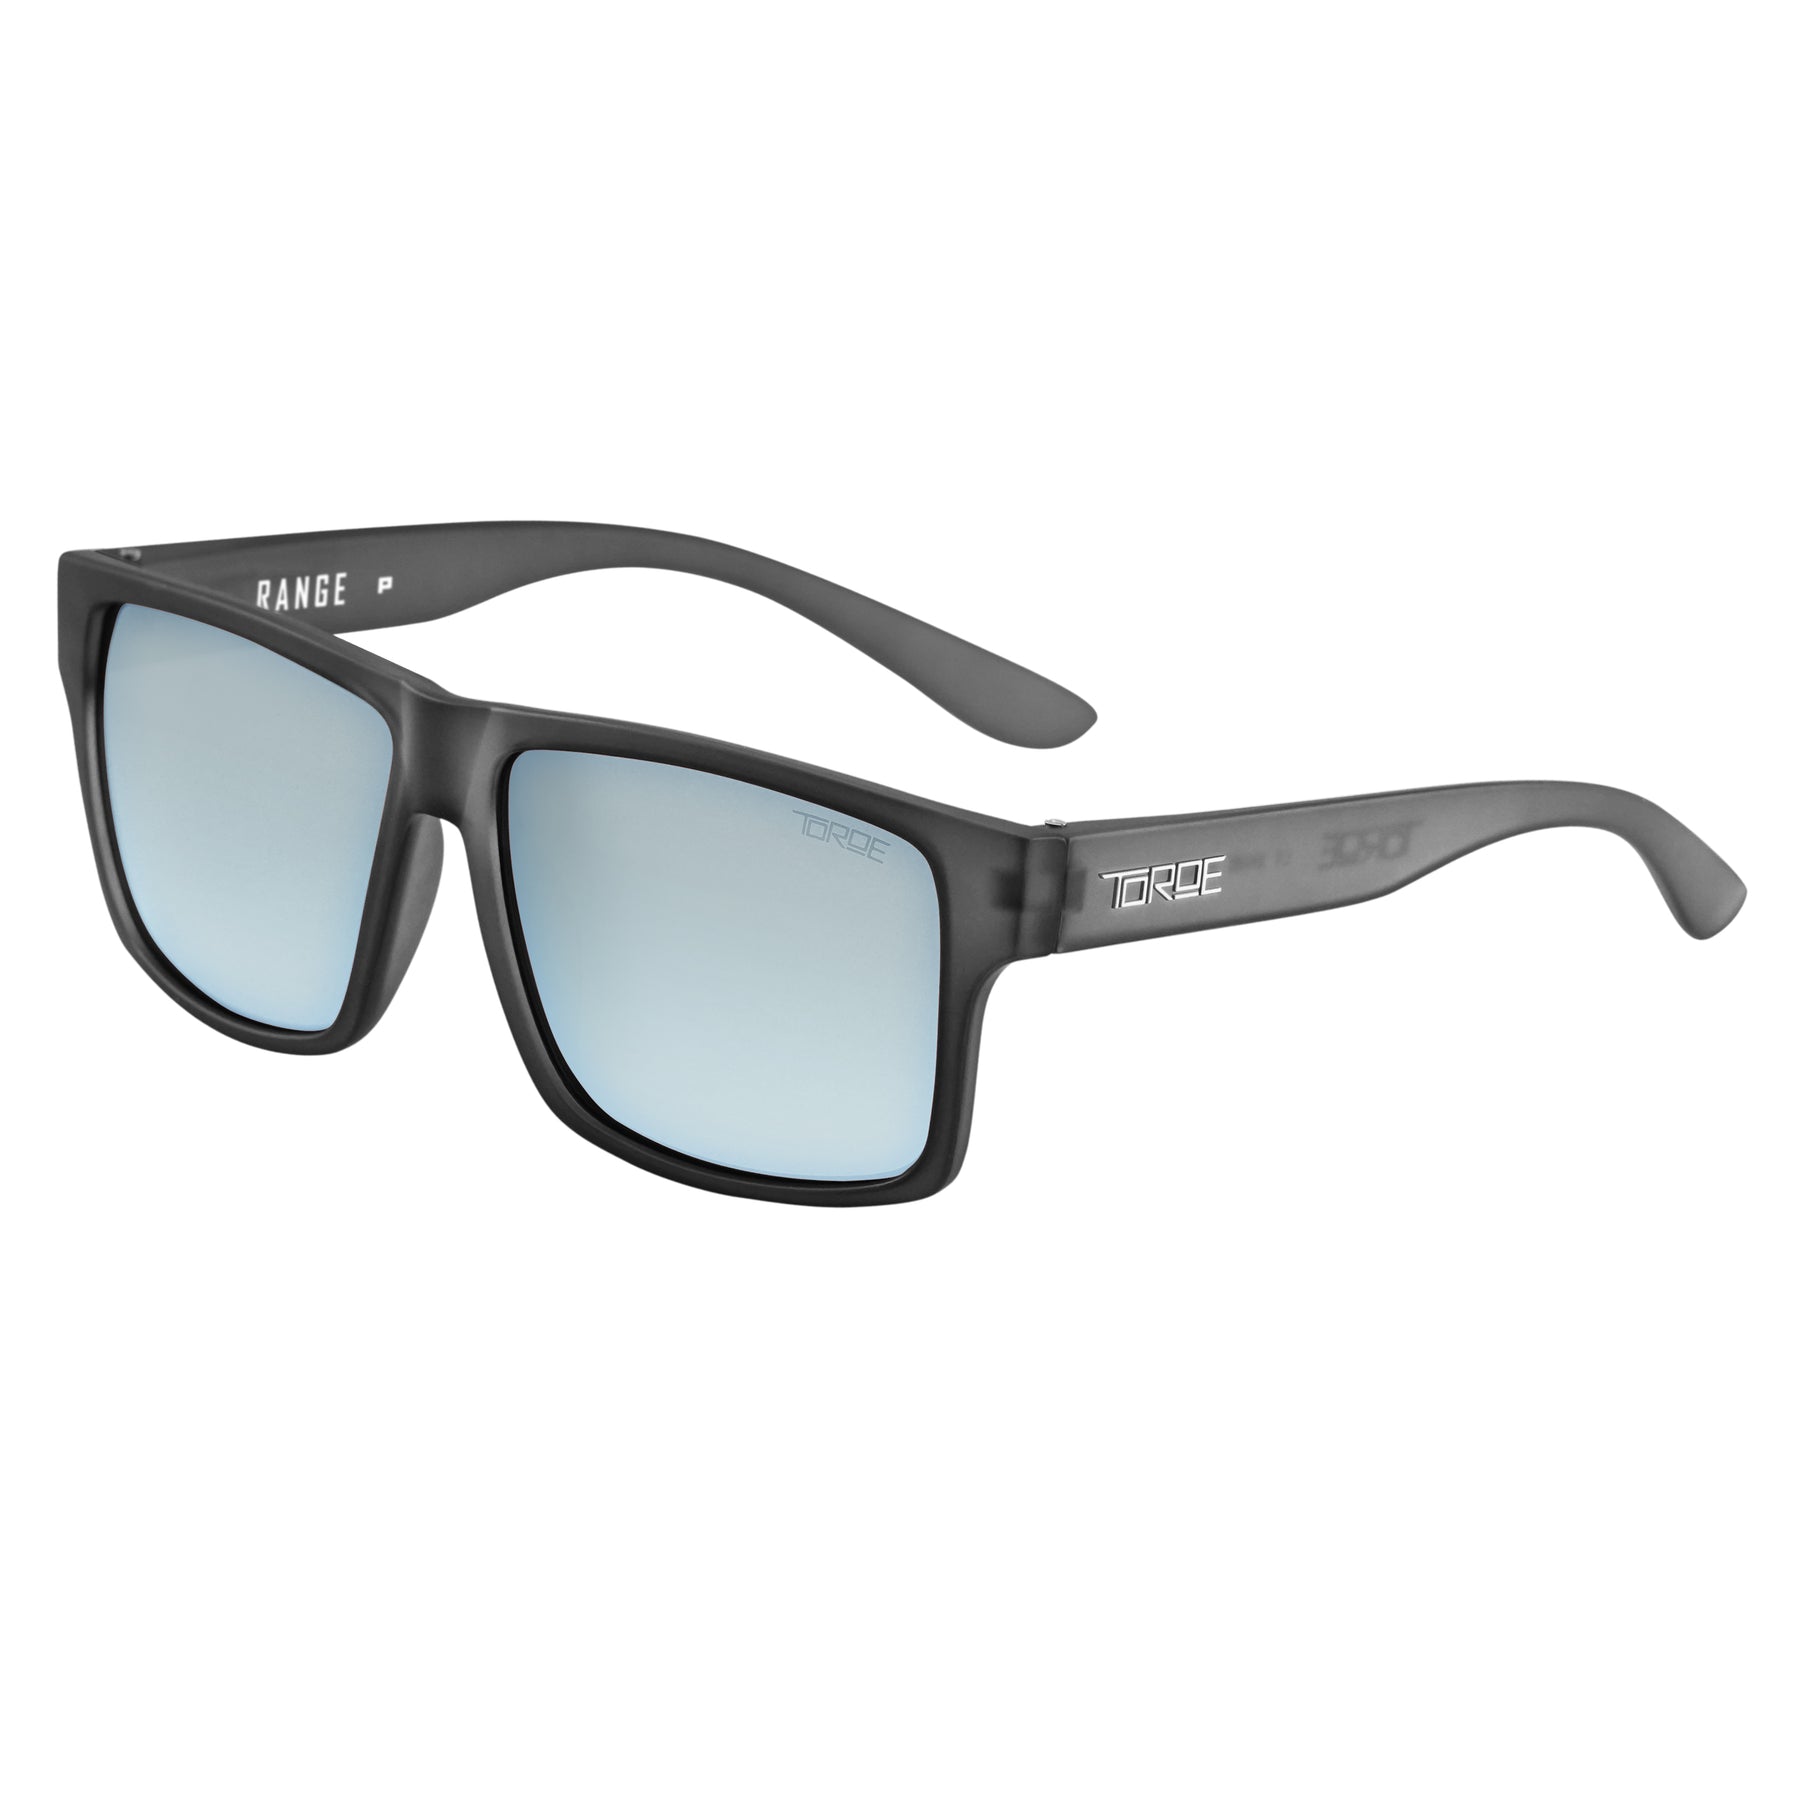 Exclusive Toroe 'Range' Polarized Sunglasses with Lifetime Warranty Frost Gray / Midnight Green Lens